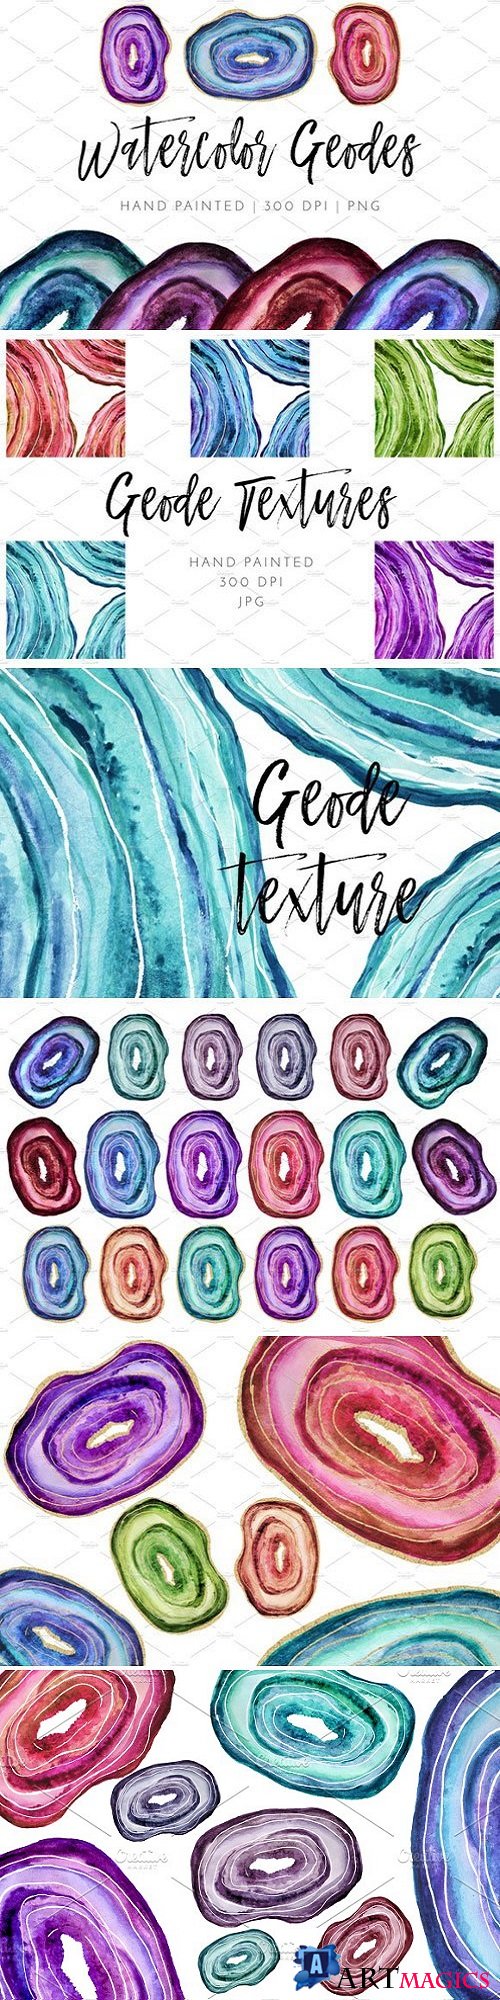 Hand Painted Watercolor Geode Agate 2176458